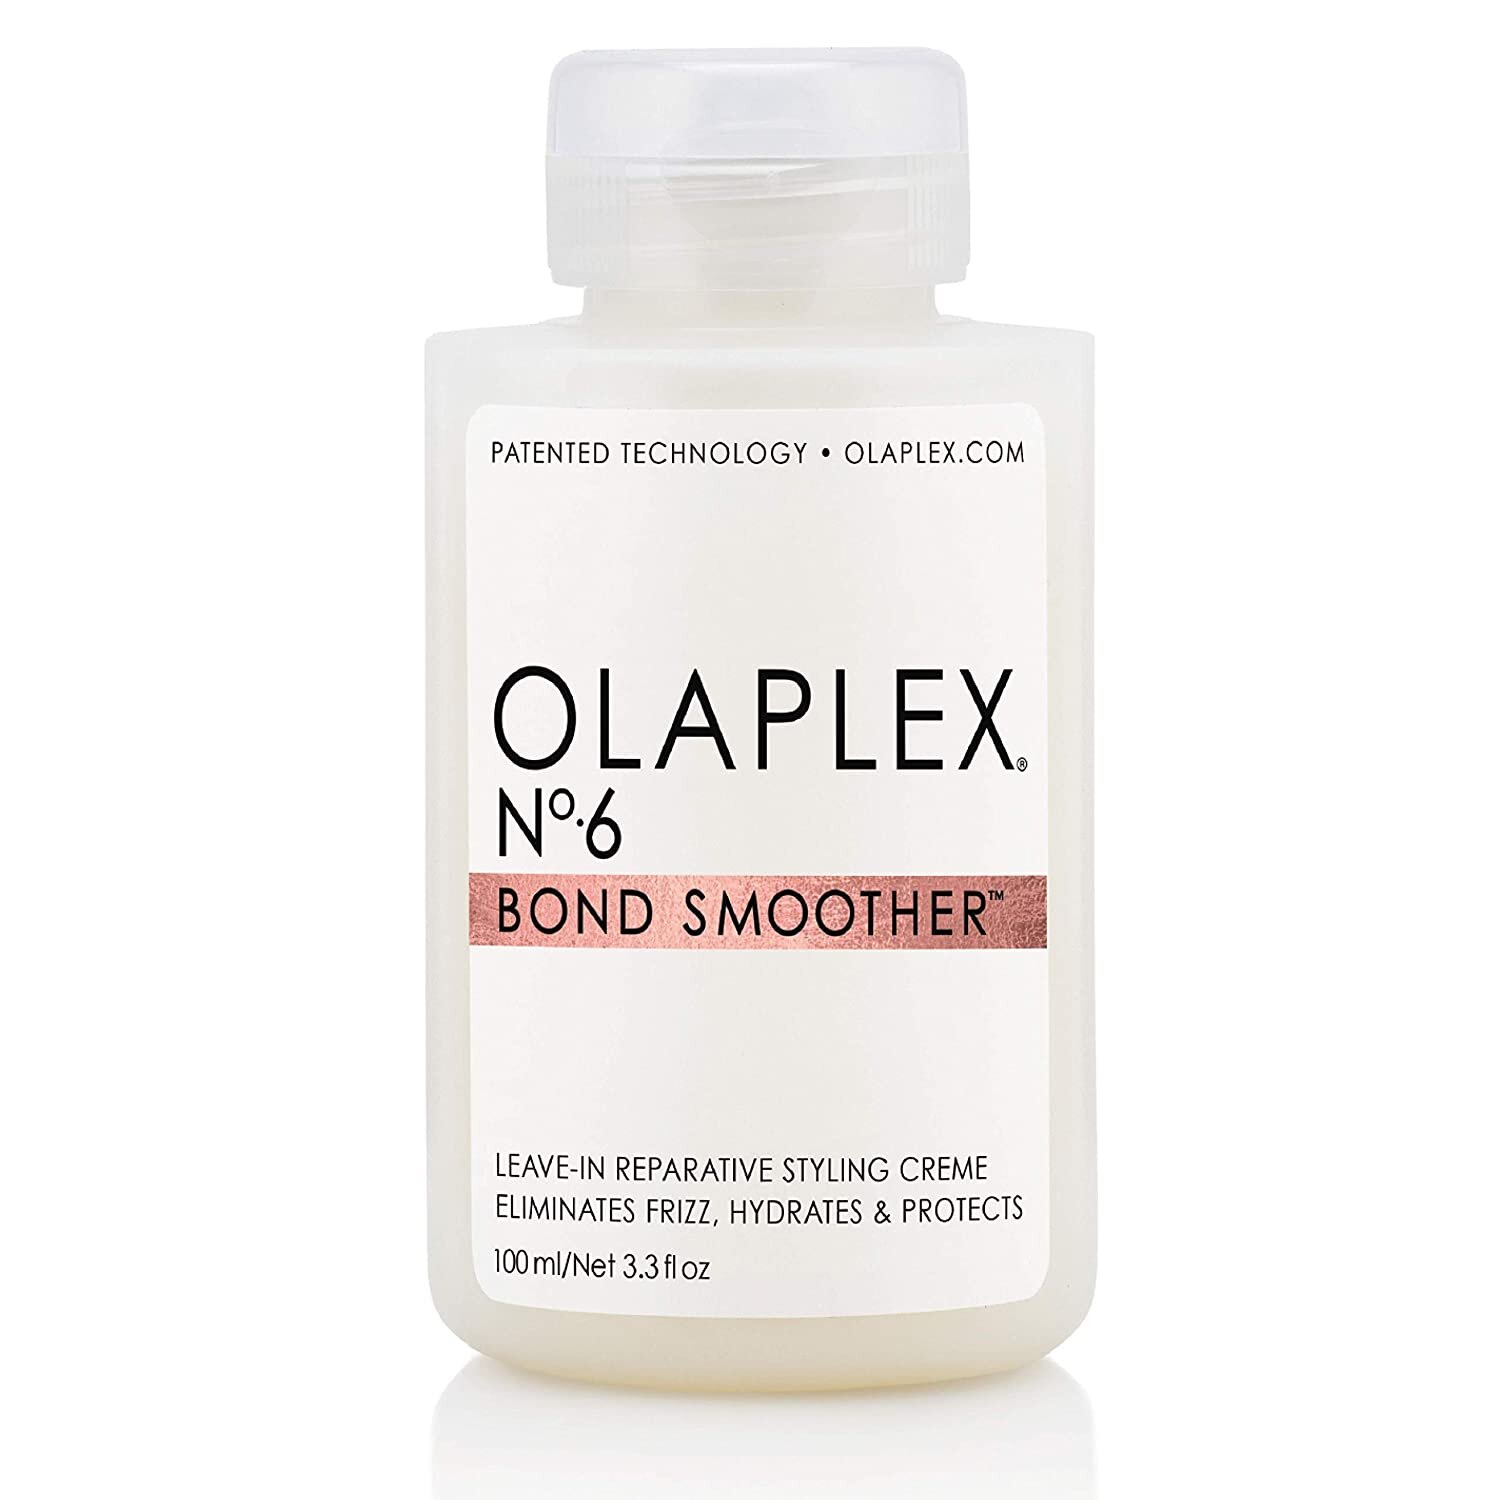 Olaplex No. 6 Bond Smoother Reparative Styling Creme — Made Up On The Go  Beauty Services: Bridal Hair, Skin + Makeup